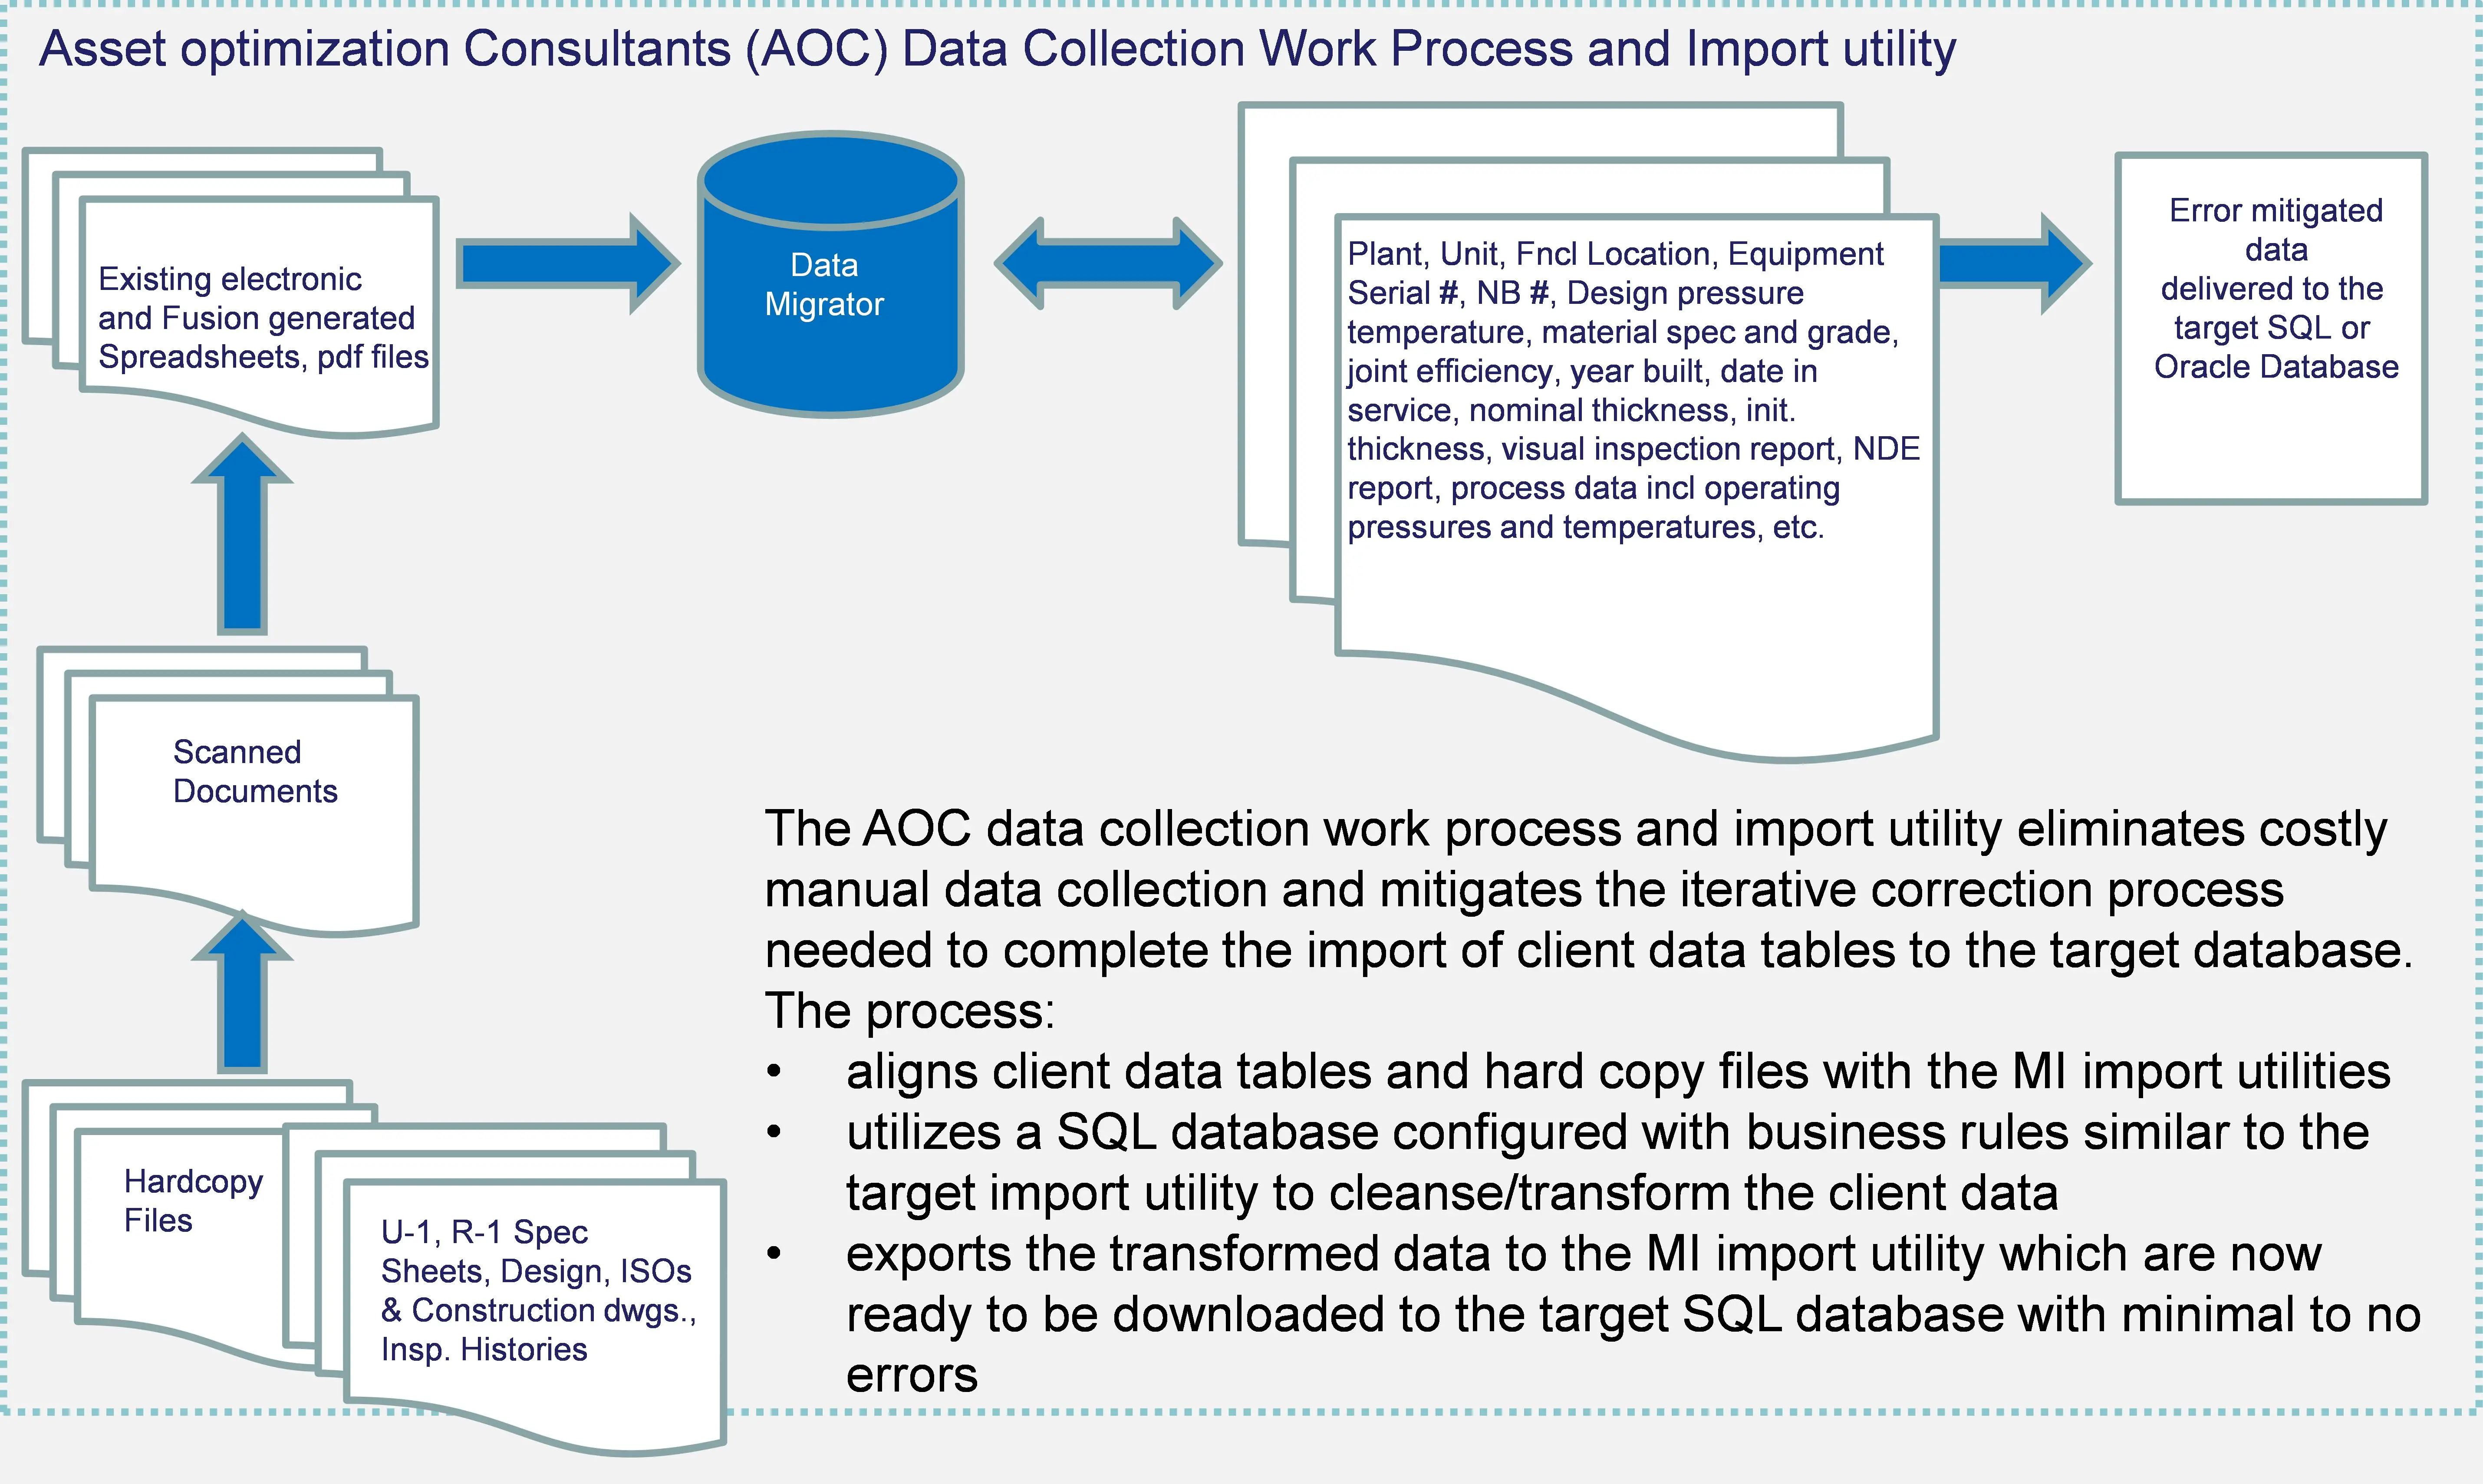 AOC Data Collection Work Process and Import Utility